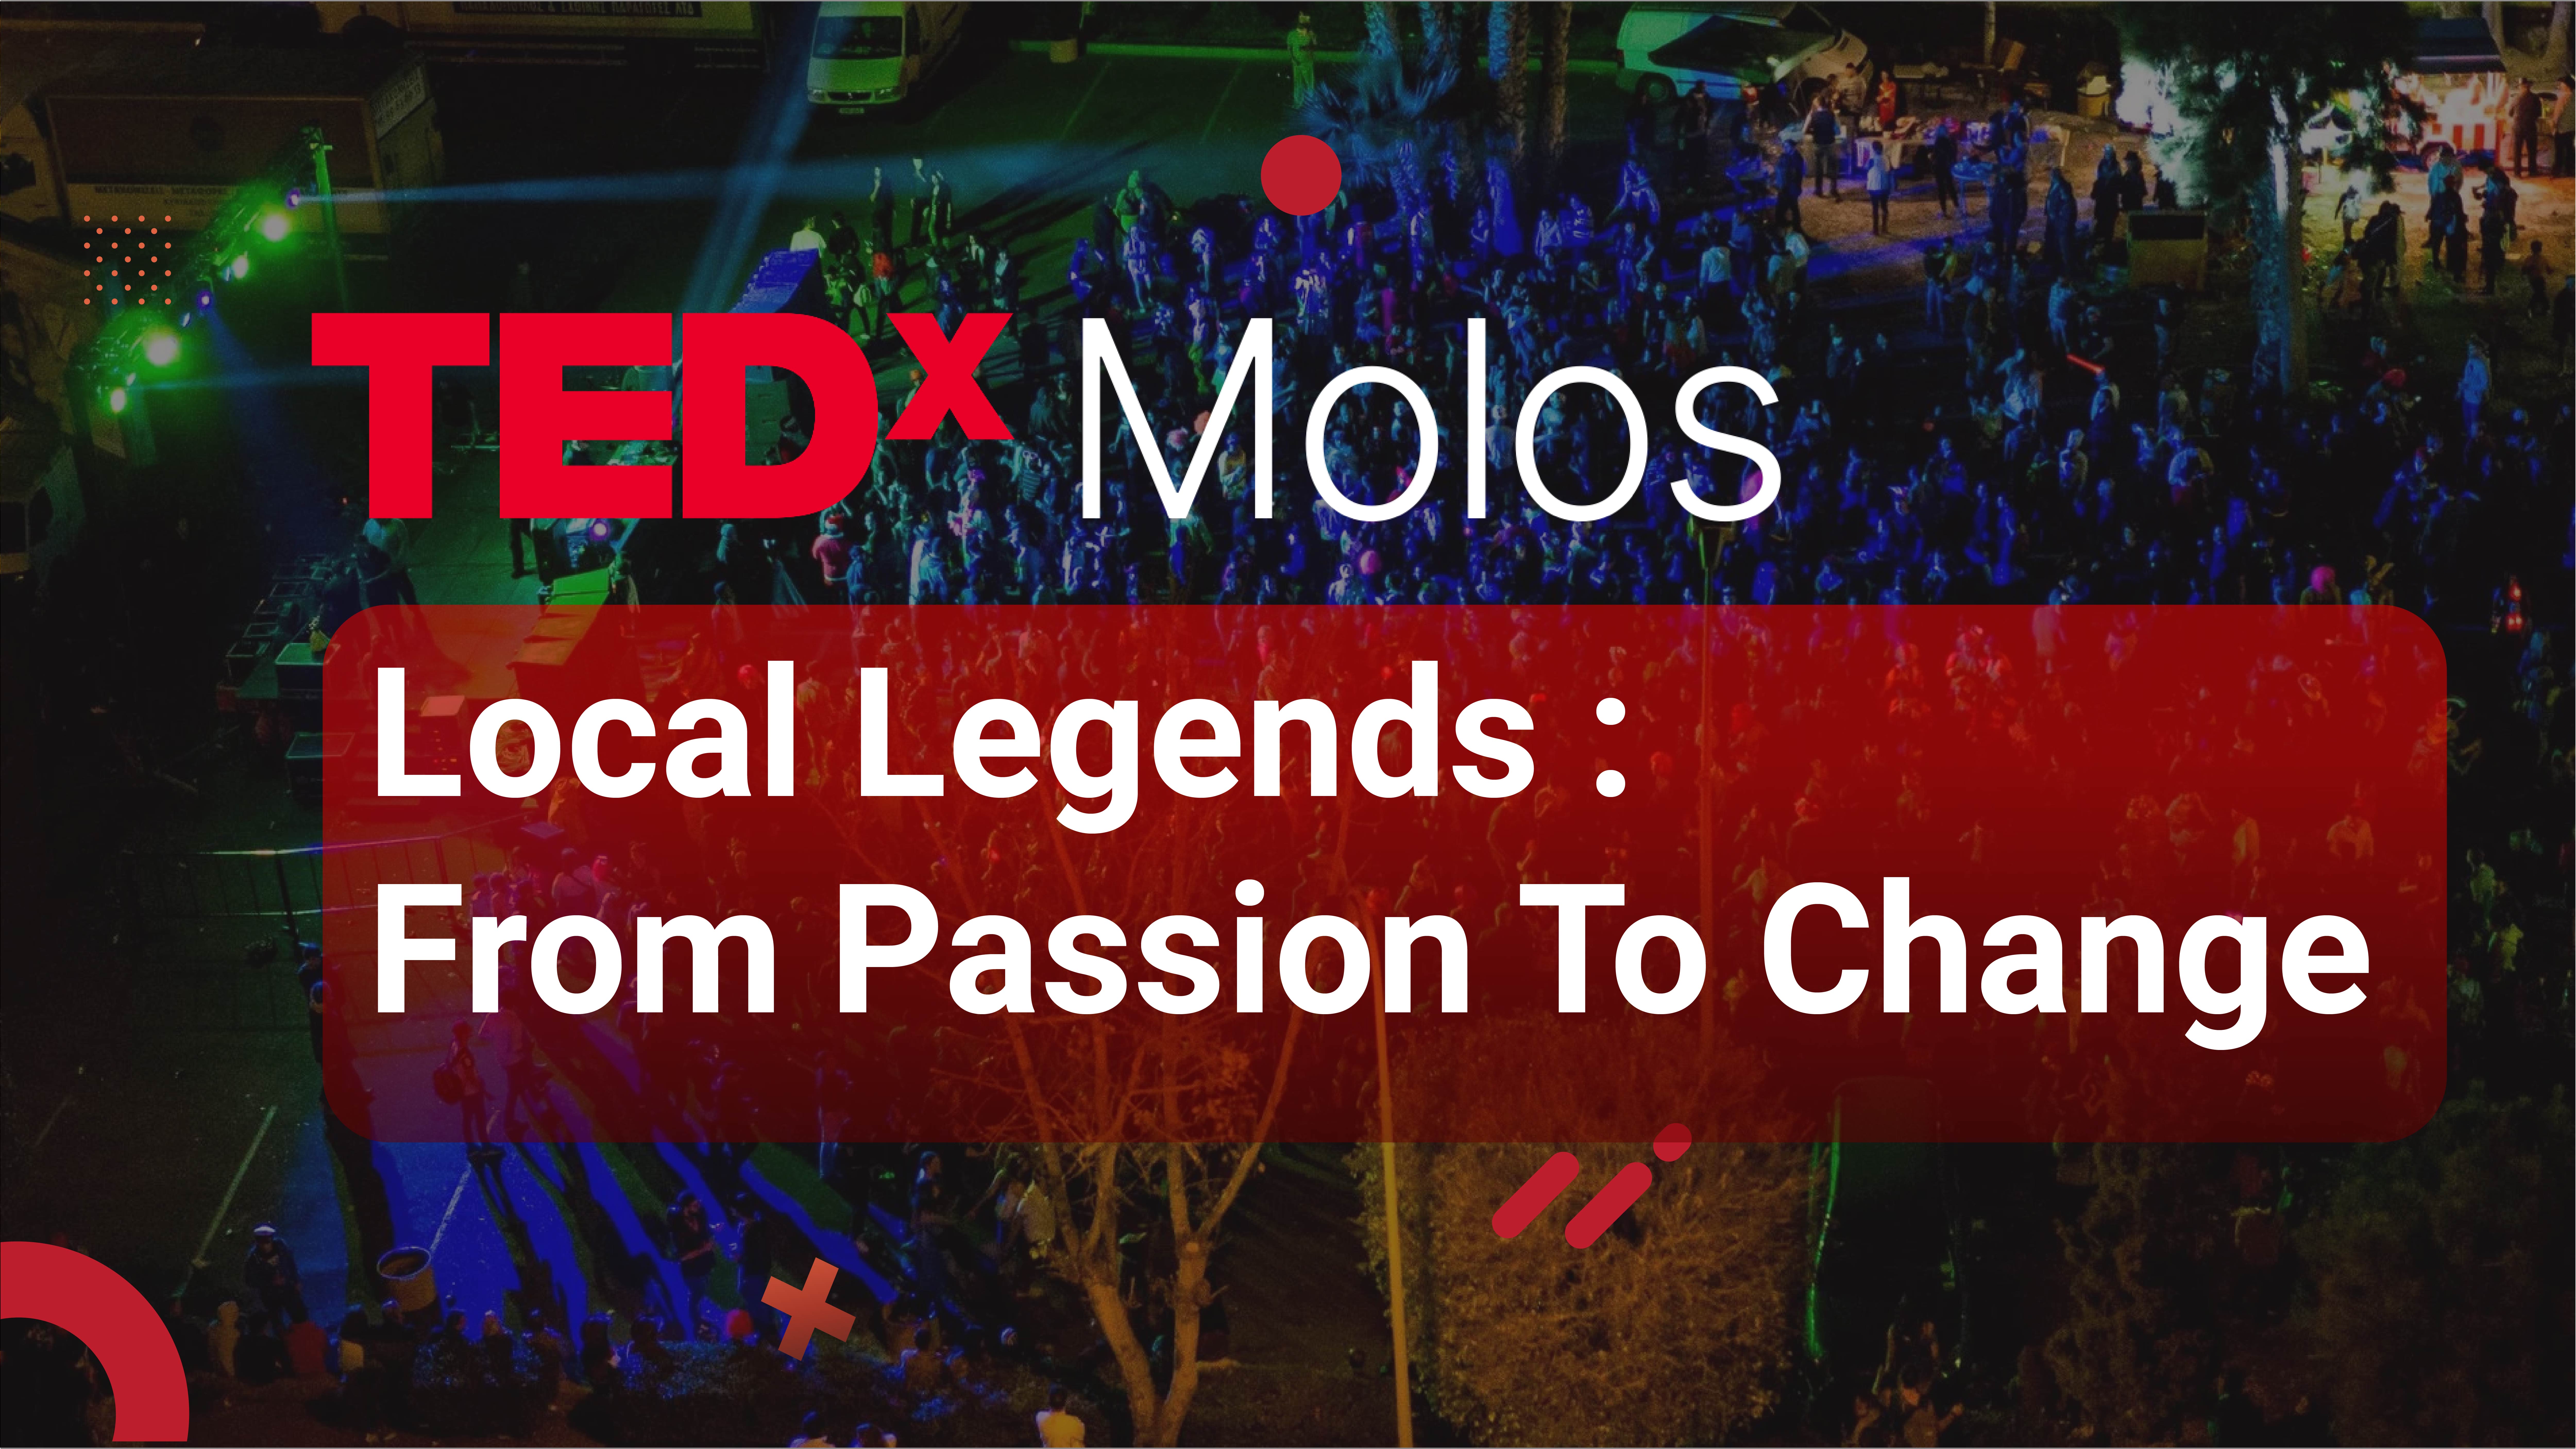 TEDxMolos: Local Legends - From Passion To Change